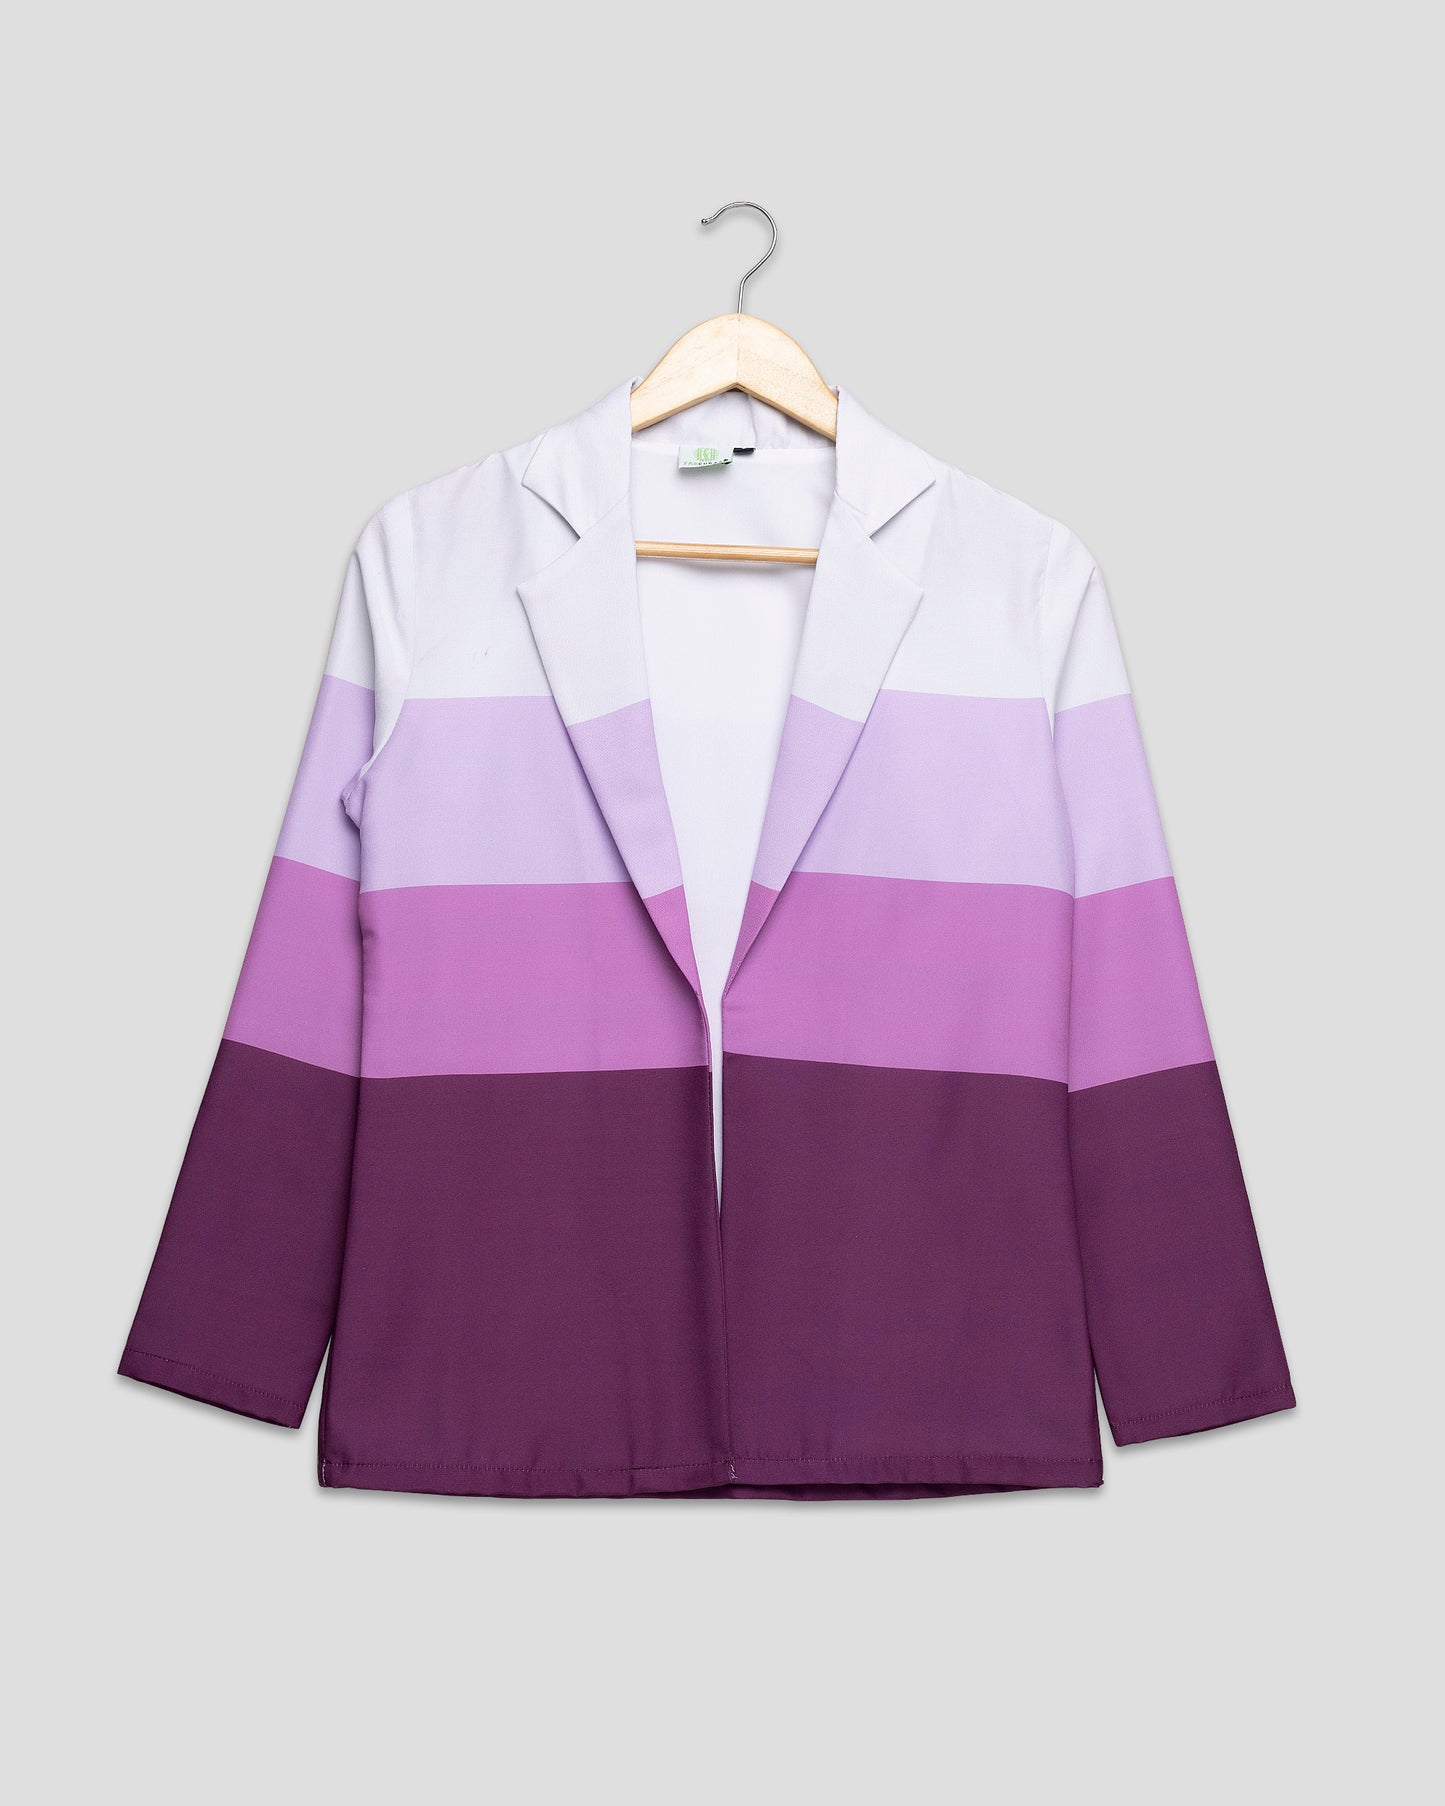 Contemporary Color Block Jacket for Women